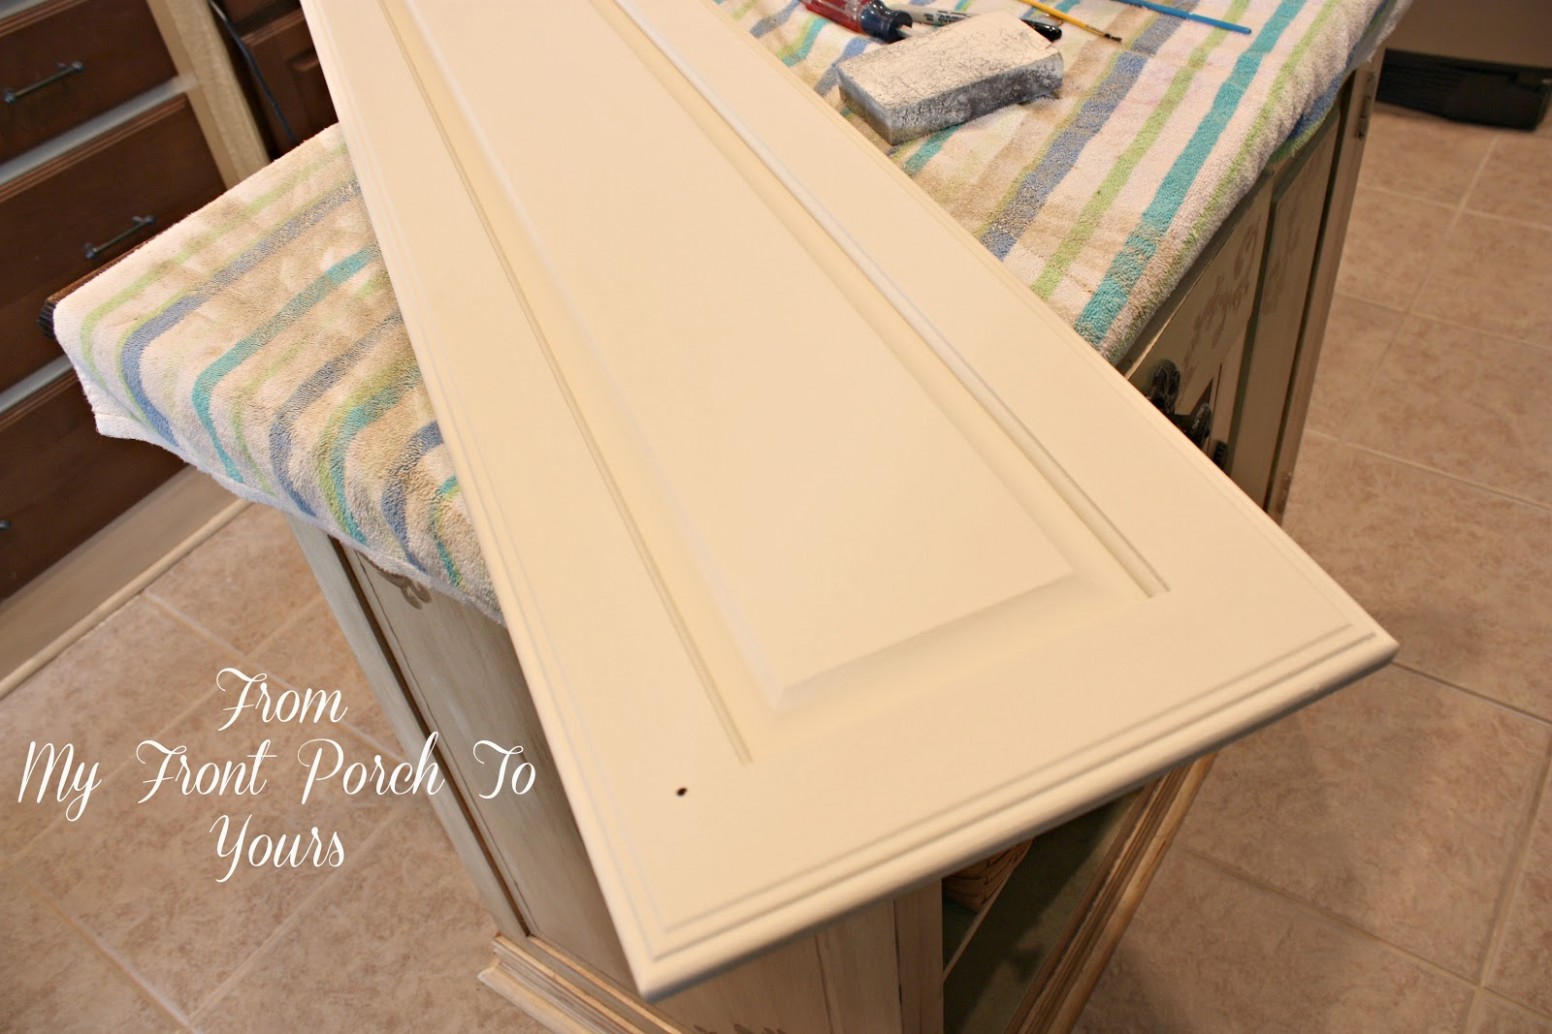 From My Front Porch To Yours: Kitchen Cabinet Painting Tutorial ..